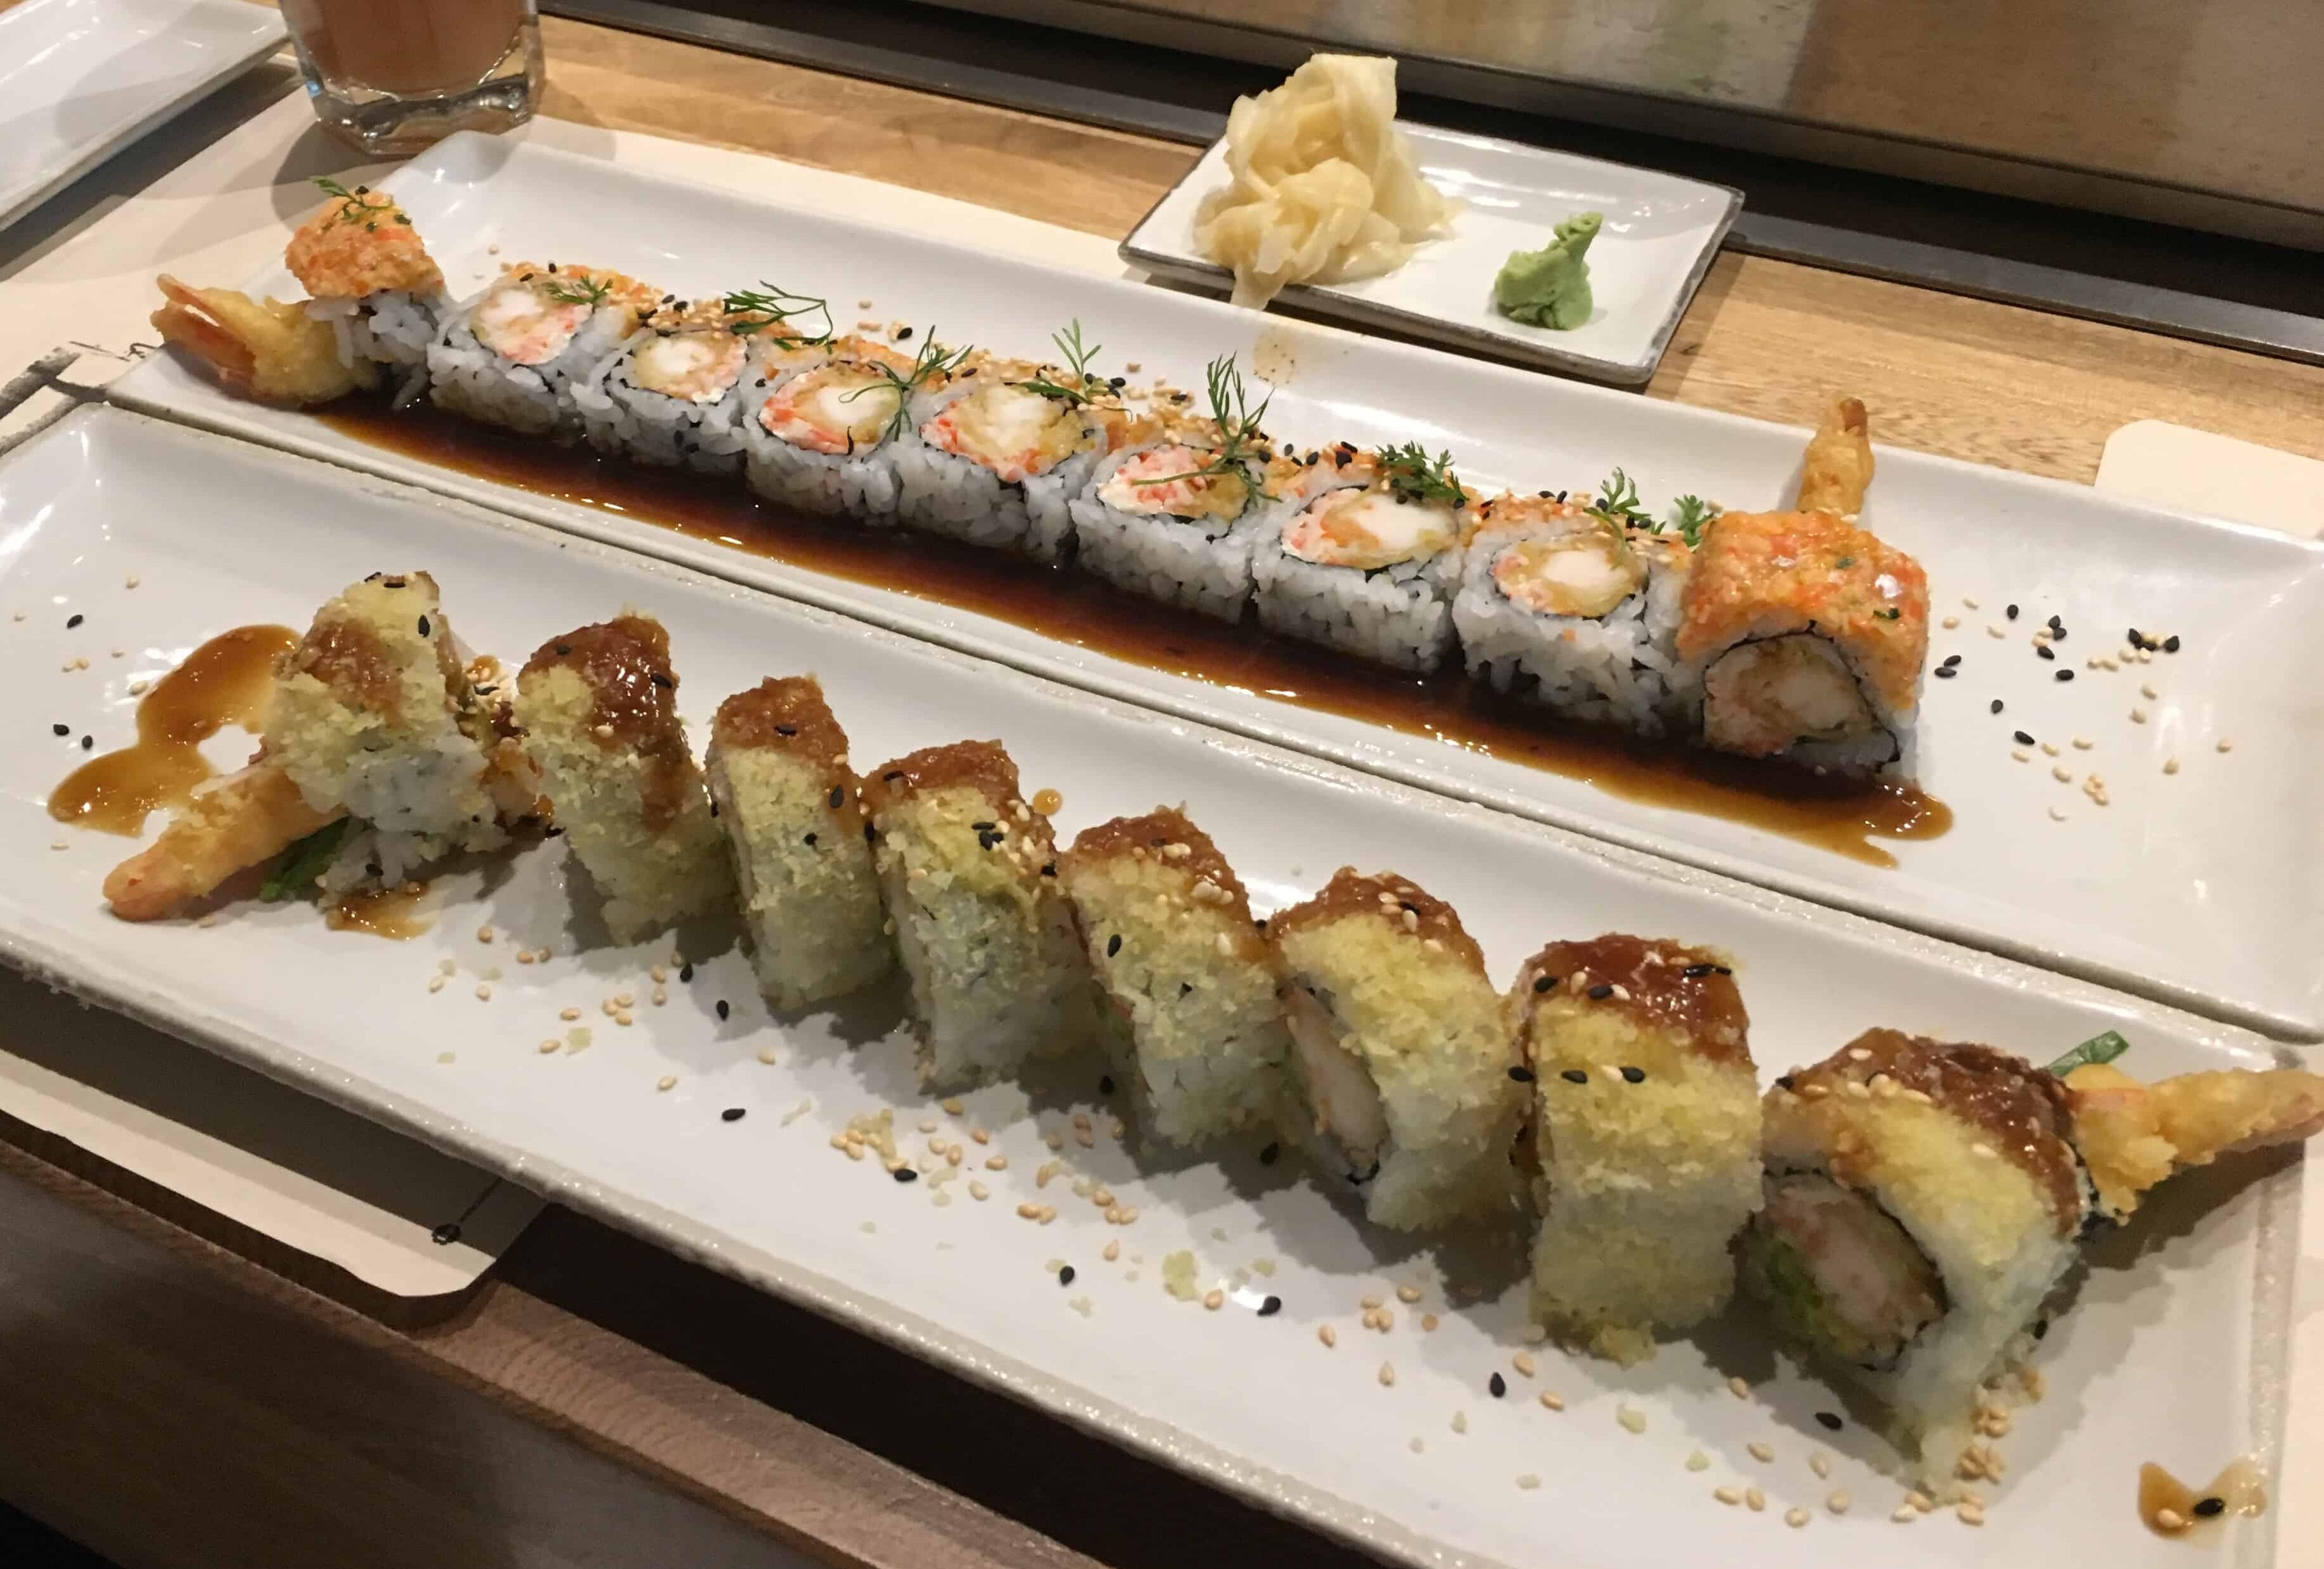 Sushi at Wok Star in Bogotá, Colombia